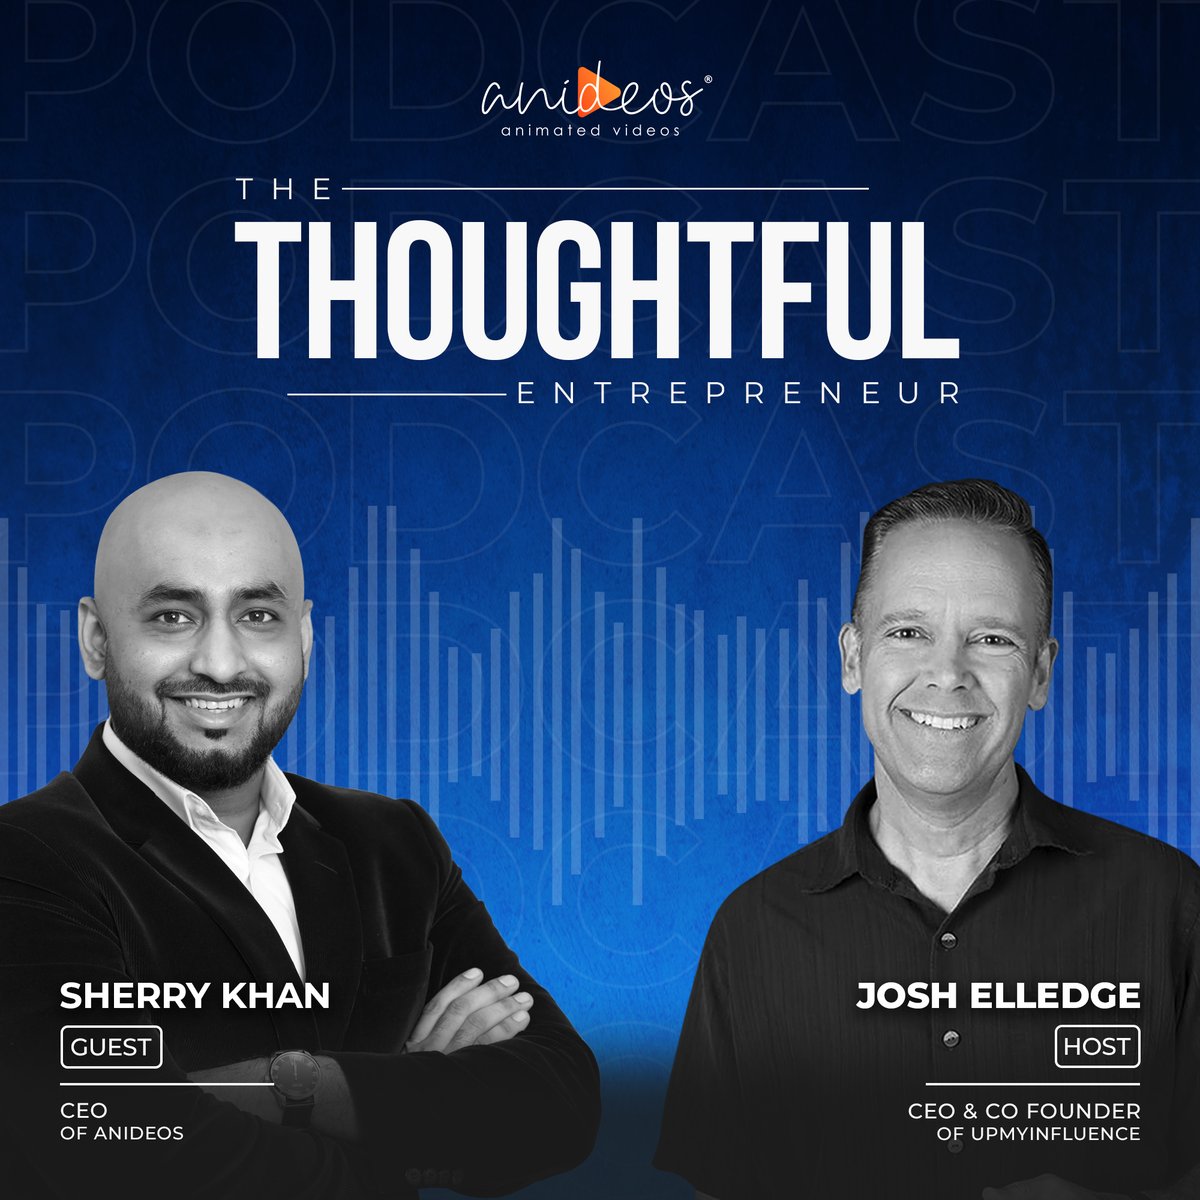 Anideos is thrilled to share a very recent impactful podcast of our CEO, Sherry Khan, with @joshelledge.

Delve with us into the transformative impact of animation on effective communication.

#anideos #animations #UpMyInfluence #TheThoughtfulEntrepreneur #Podcast